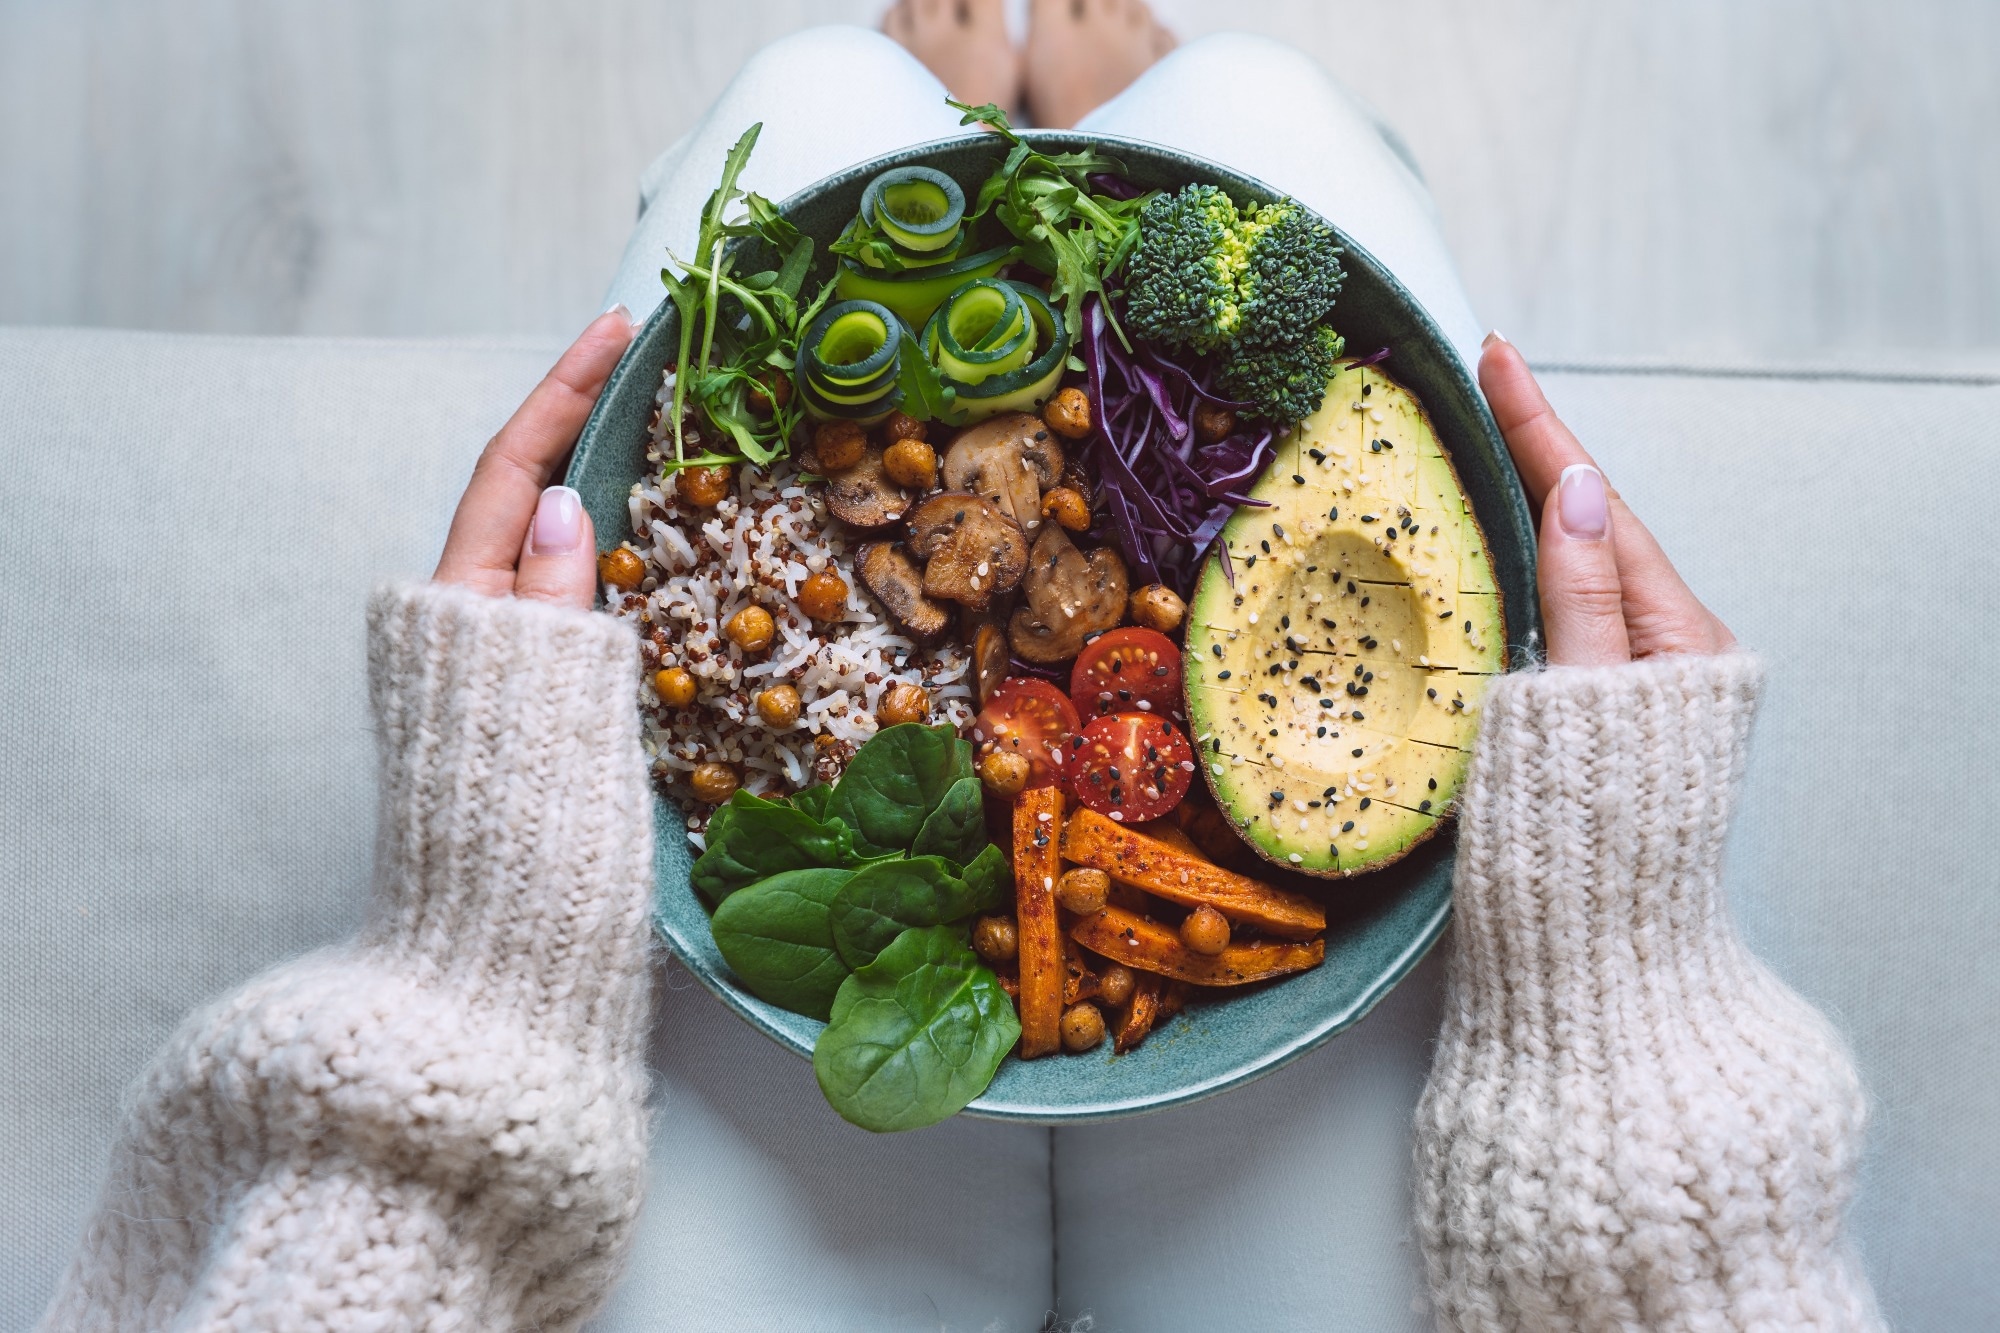 Study: Adherence to different forms of plant-based diets and pregnancy outcomes in the Danish National Birth Cohort: A prospective observational study. Image Credit: Creative Cat Studio / Shutterstock